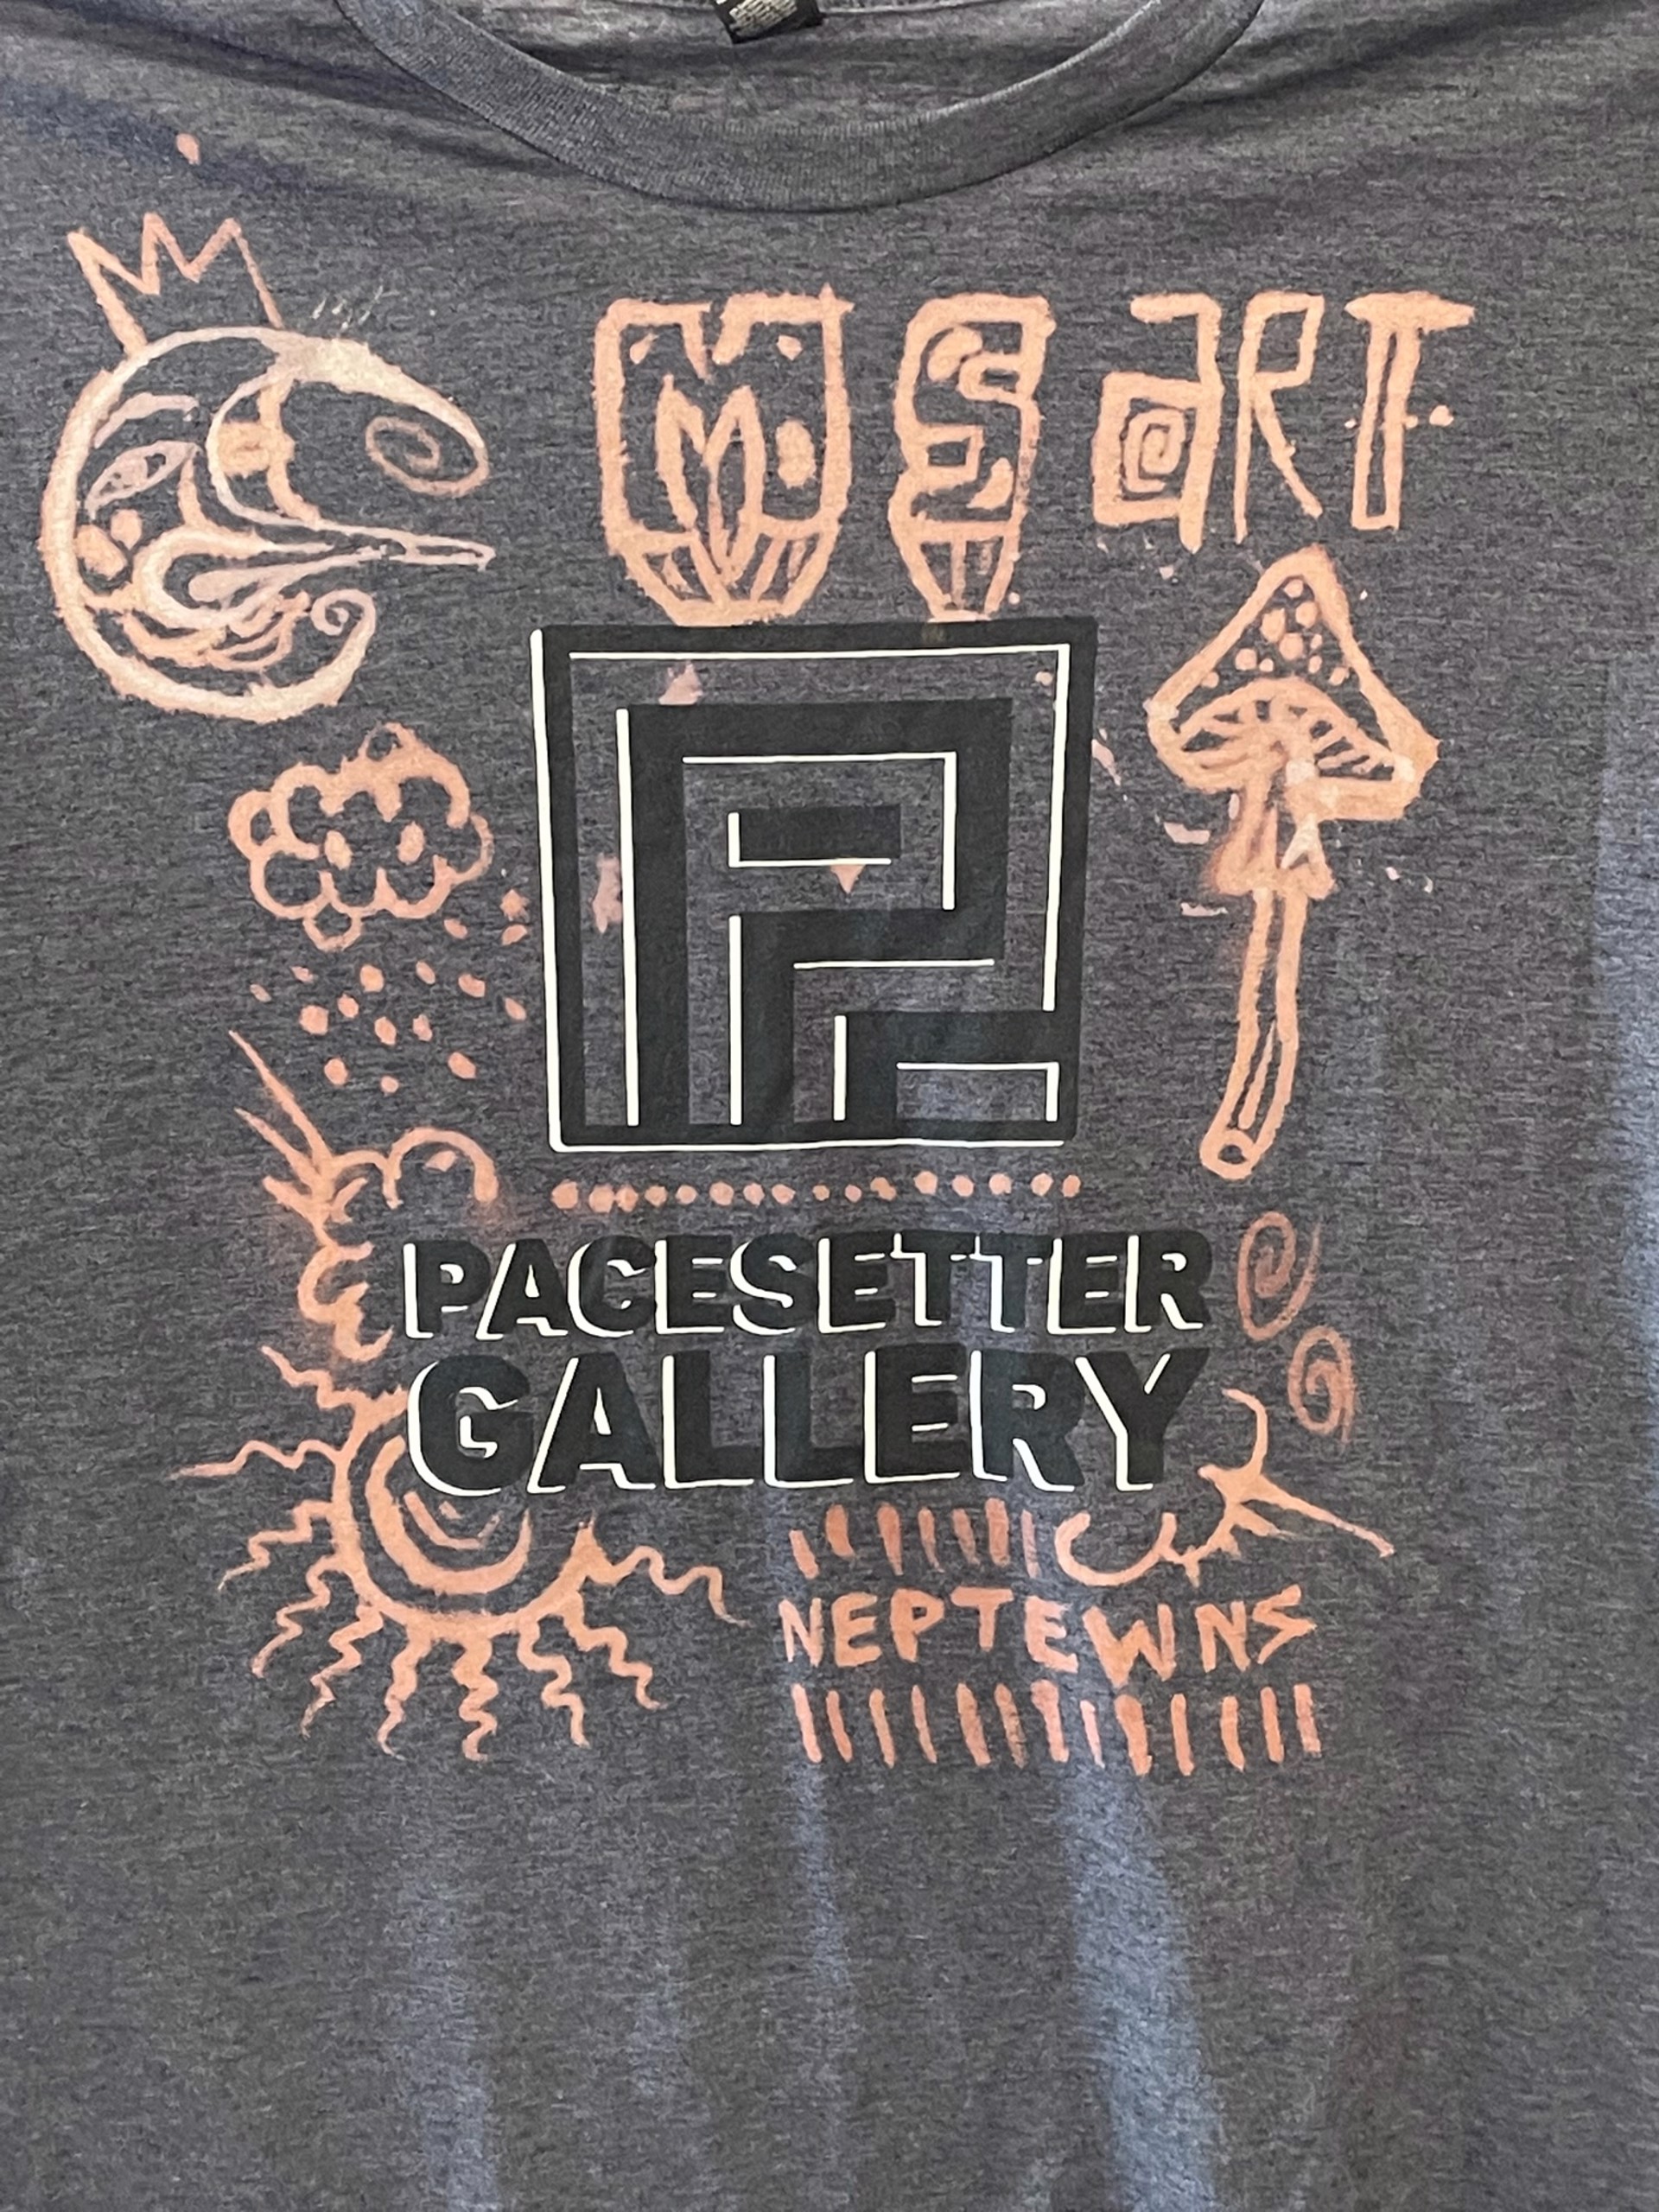 Handcrafted Zoe Ishee Pacesetter Shirt June XL by Zoe Ishee